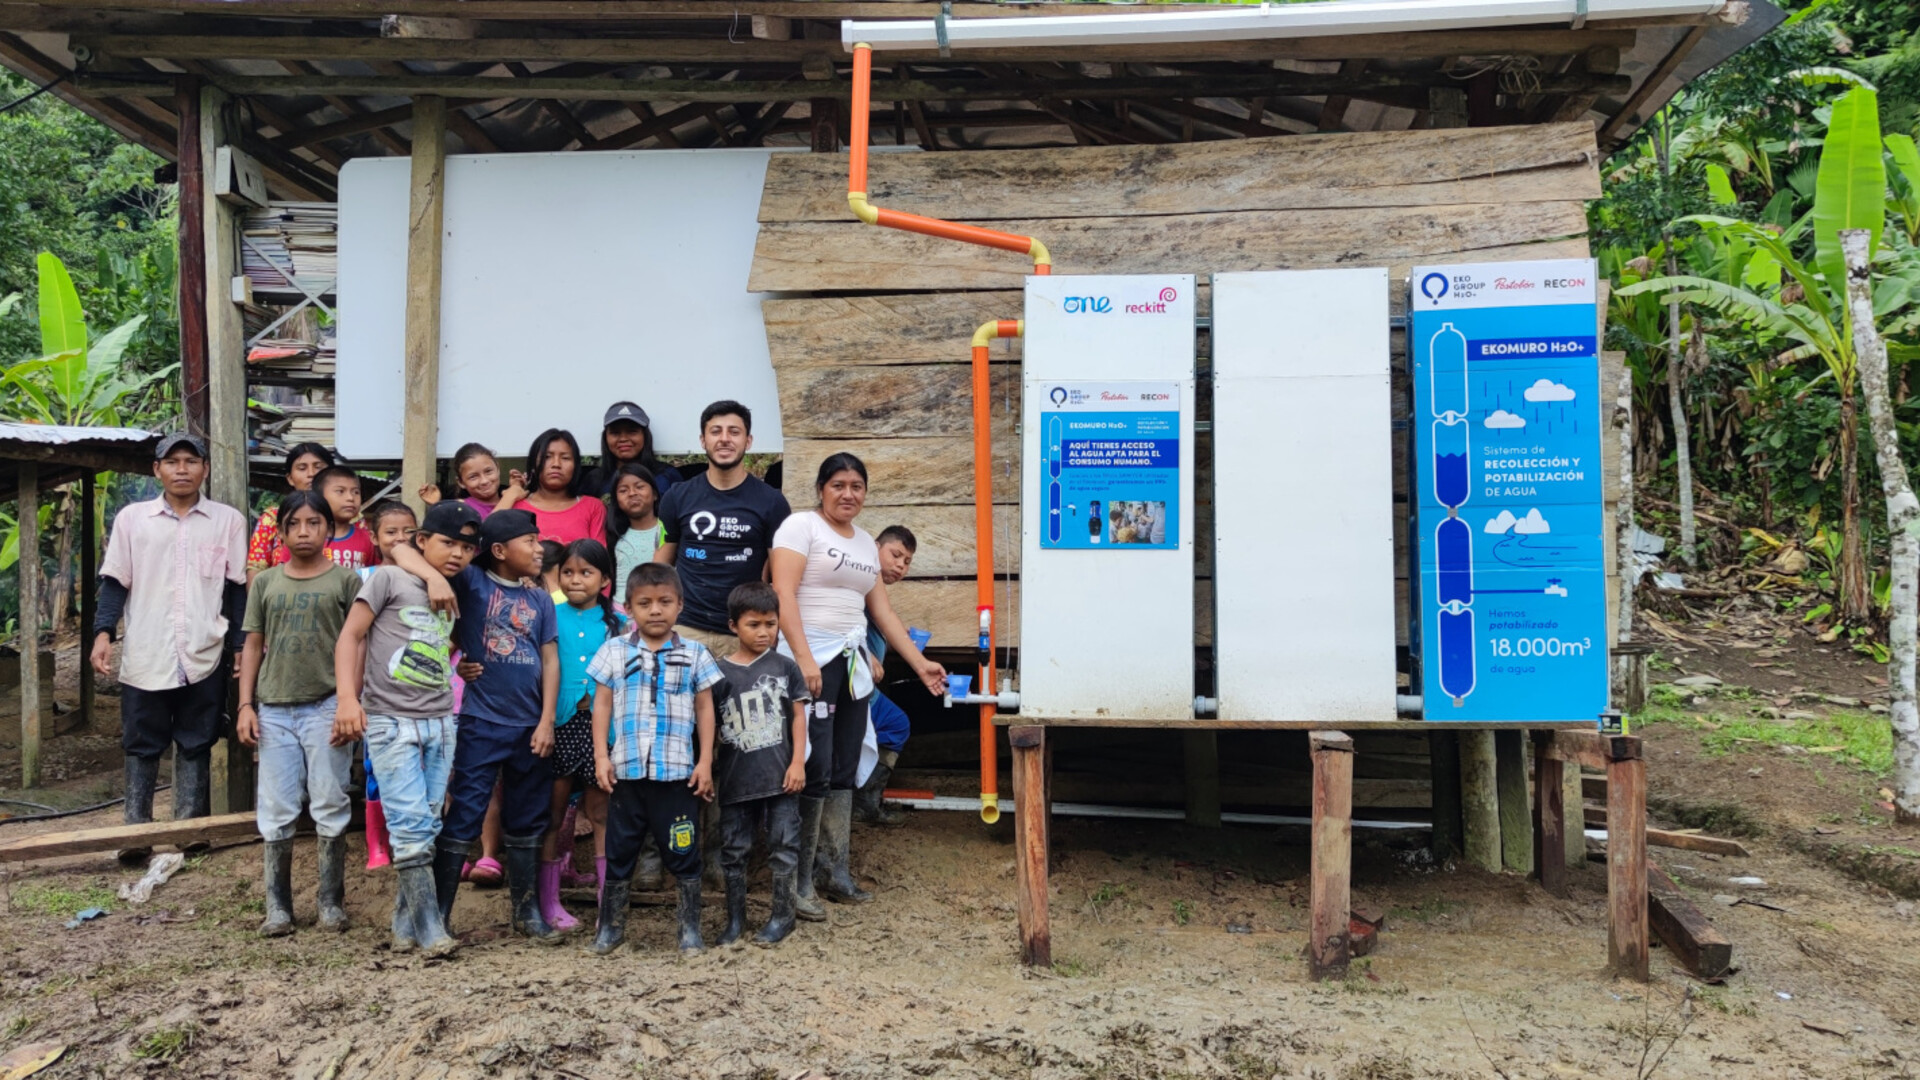 Group photo next to rainwater system